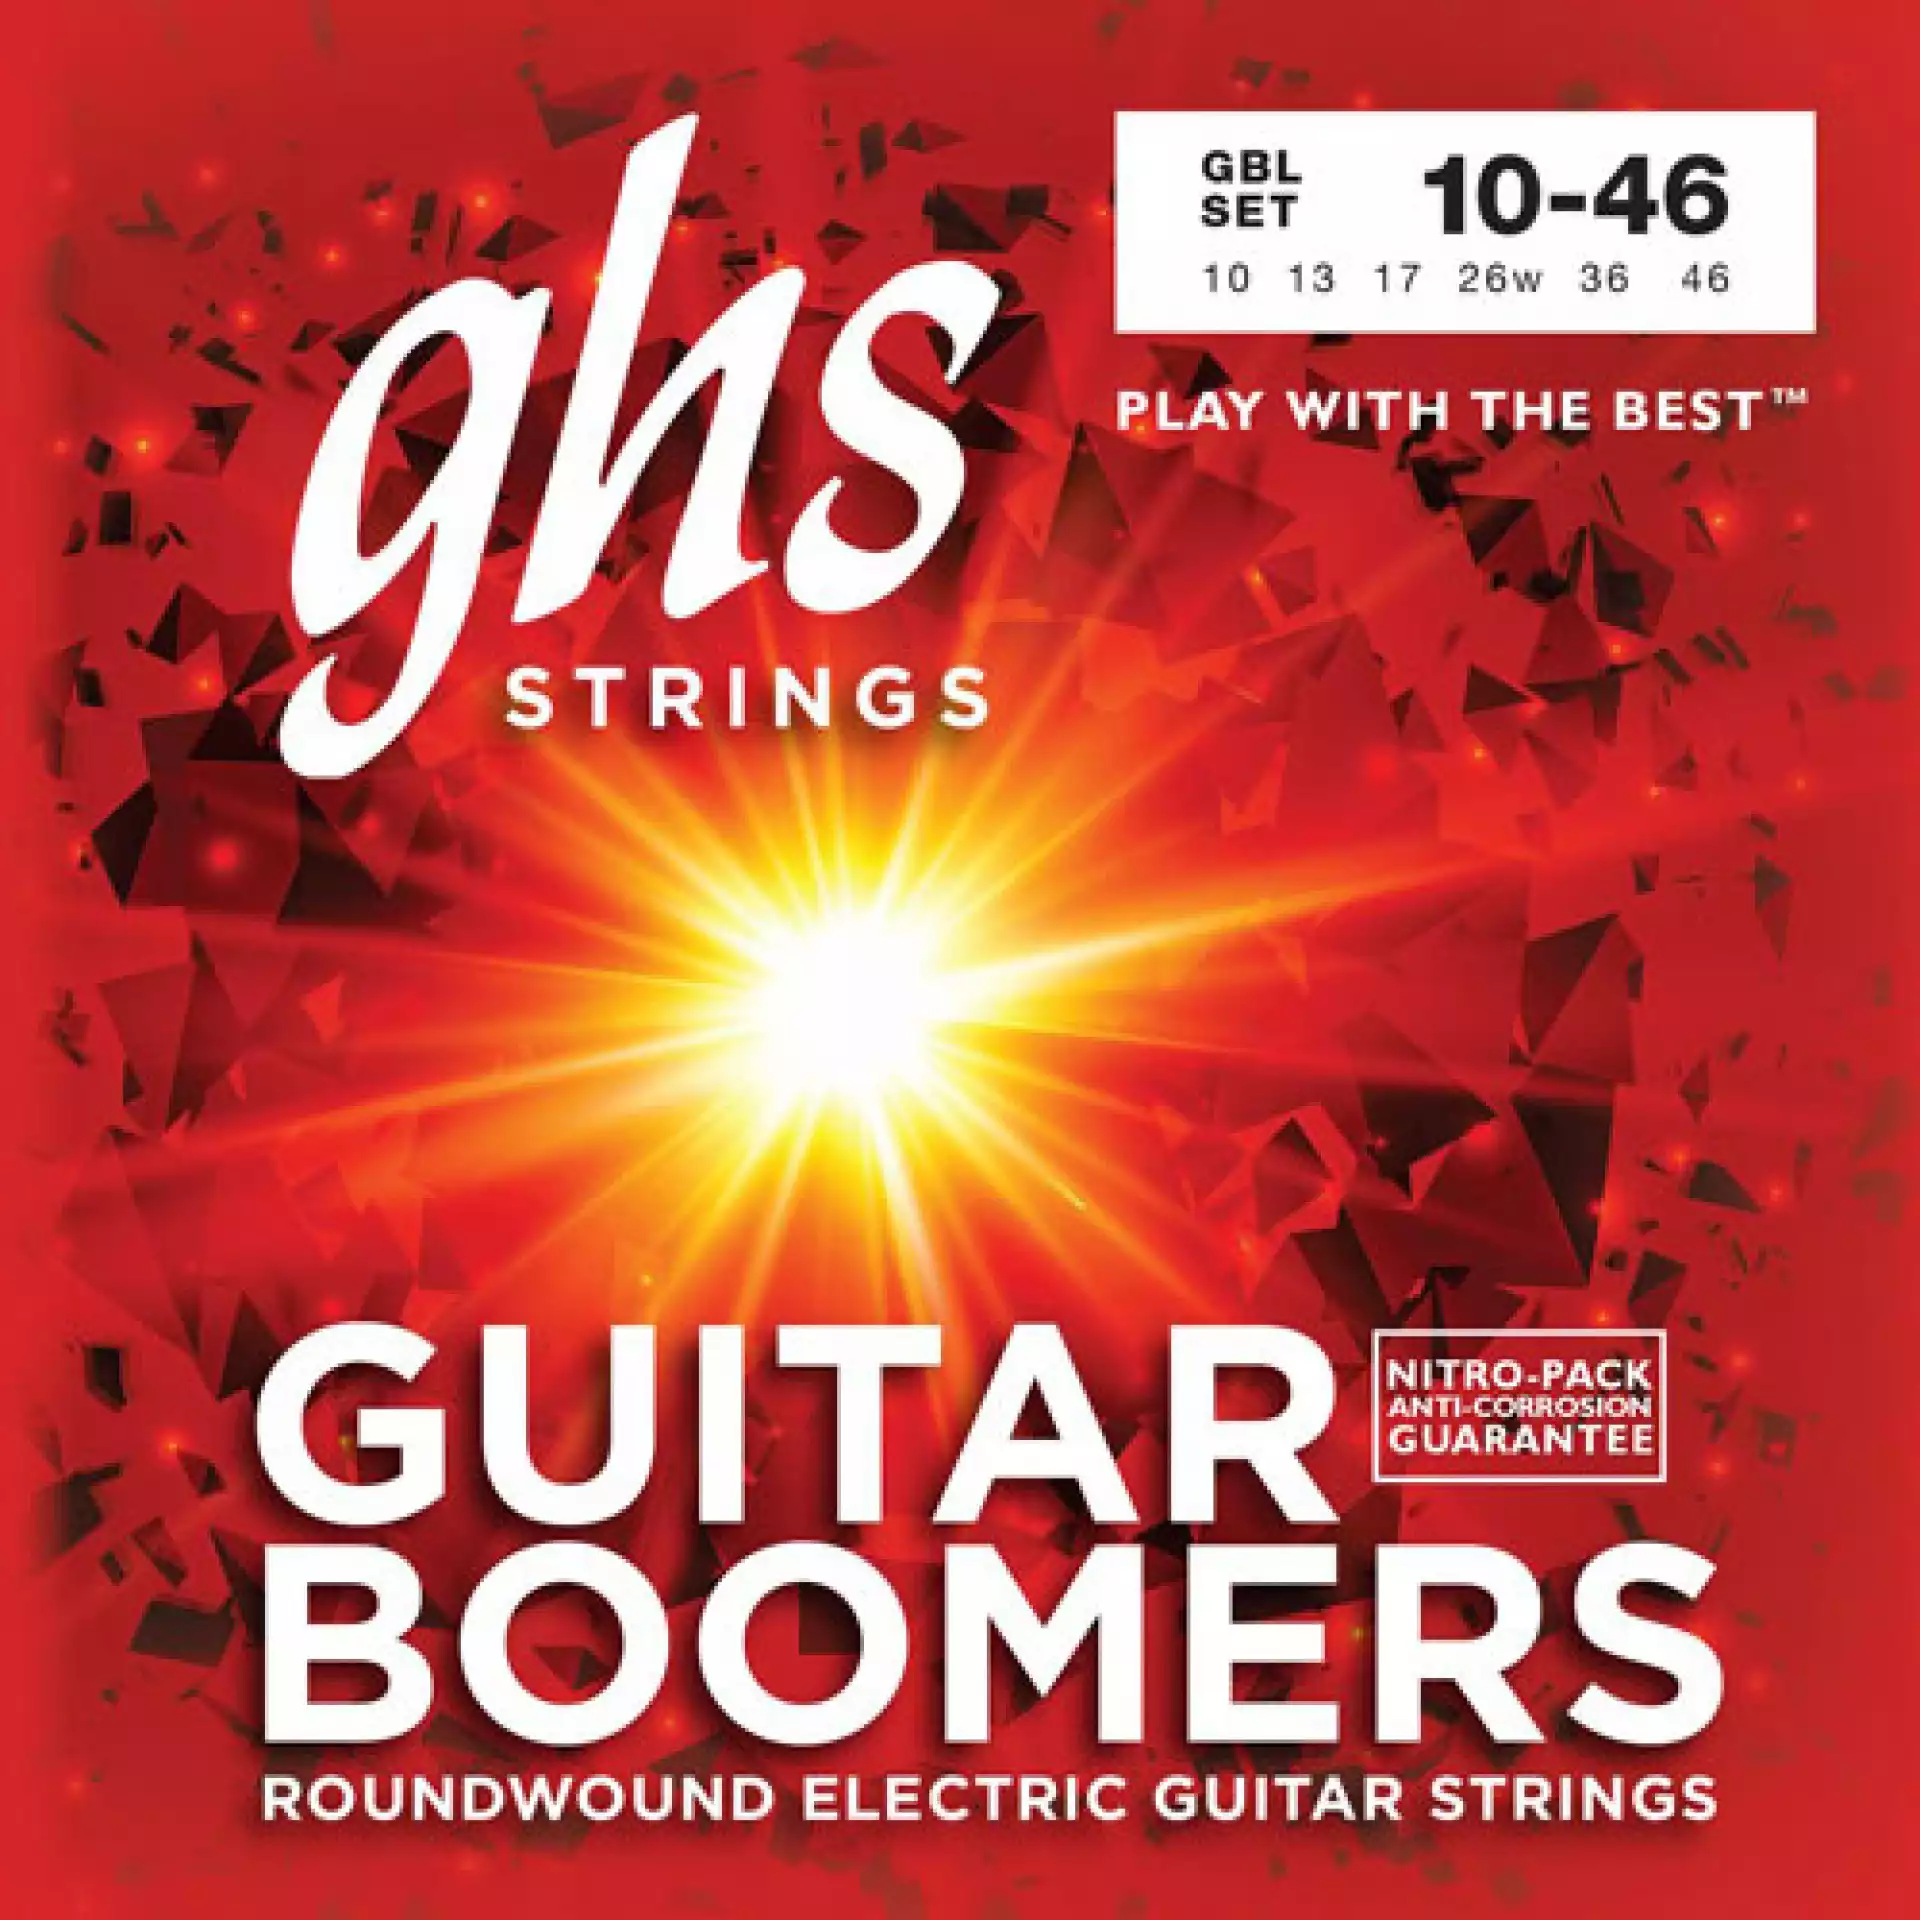 GHS GBL Boomers Roundwound Light Electric Guitar Strings (6-String Set, 10 - 46)